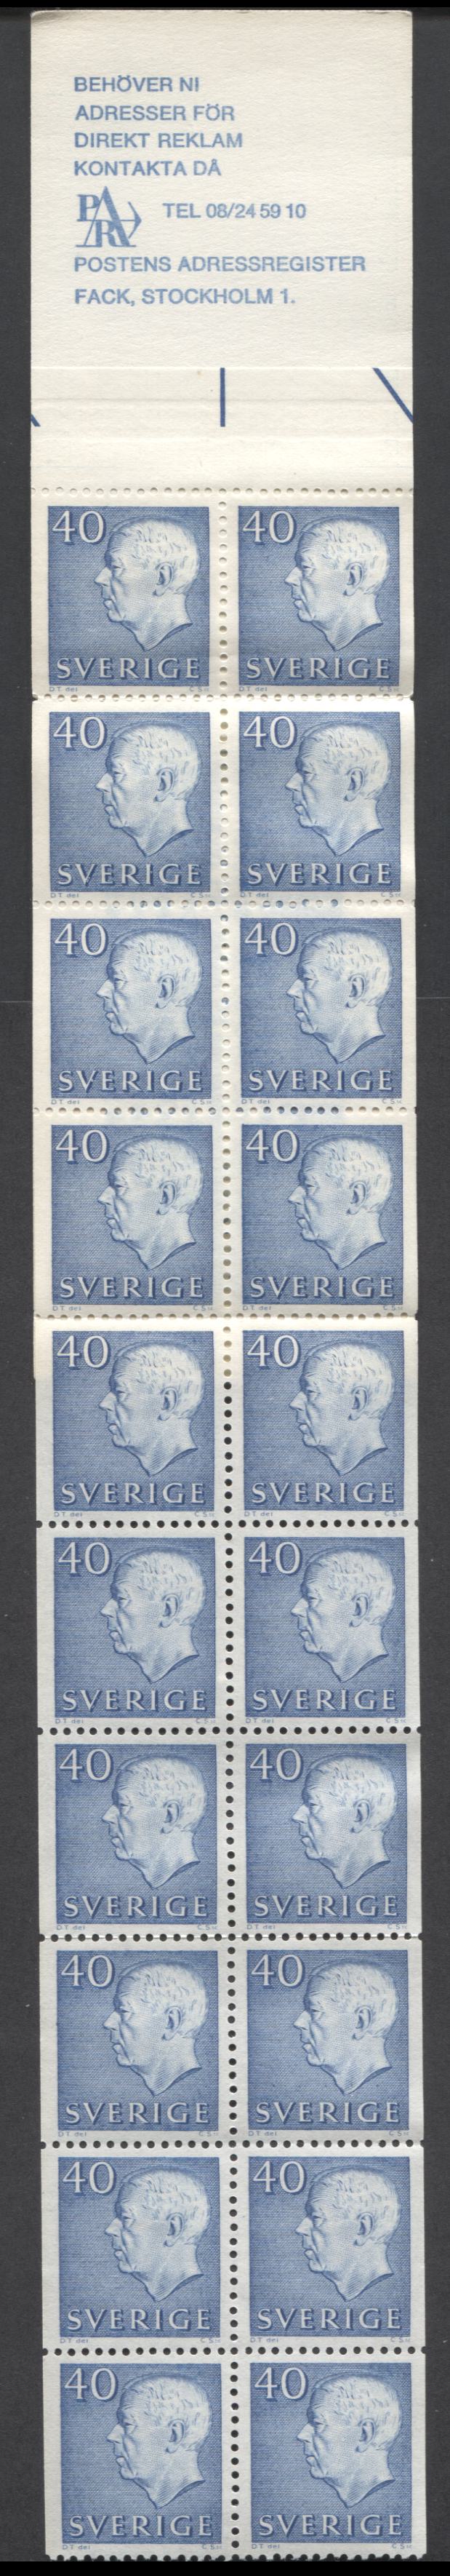 Lot 187 Sweden SC#669a (Facit #H165) 40 Ore Ultramarine 1965 Re-Engraved King Gustav VI Adolf Definitive Issue, With Centrally Placed Sneds, A VFNH Booklet of 20, Click on Listing to See ALL Pictures, Estimated Value $26